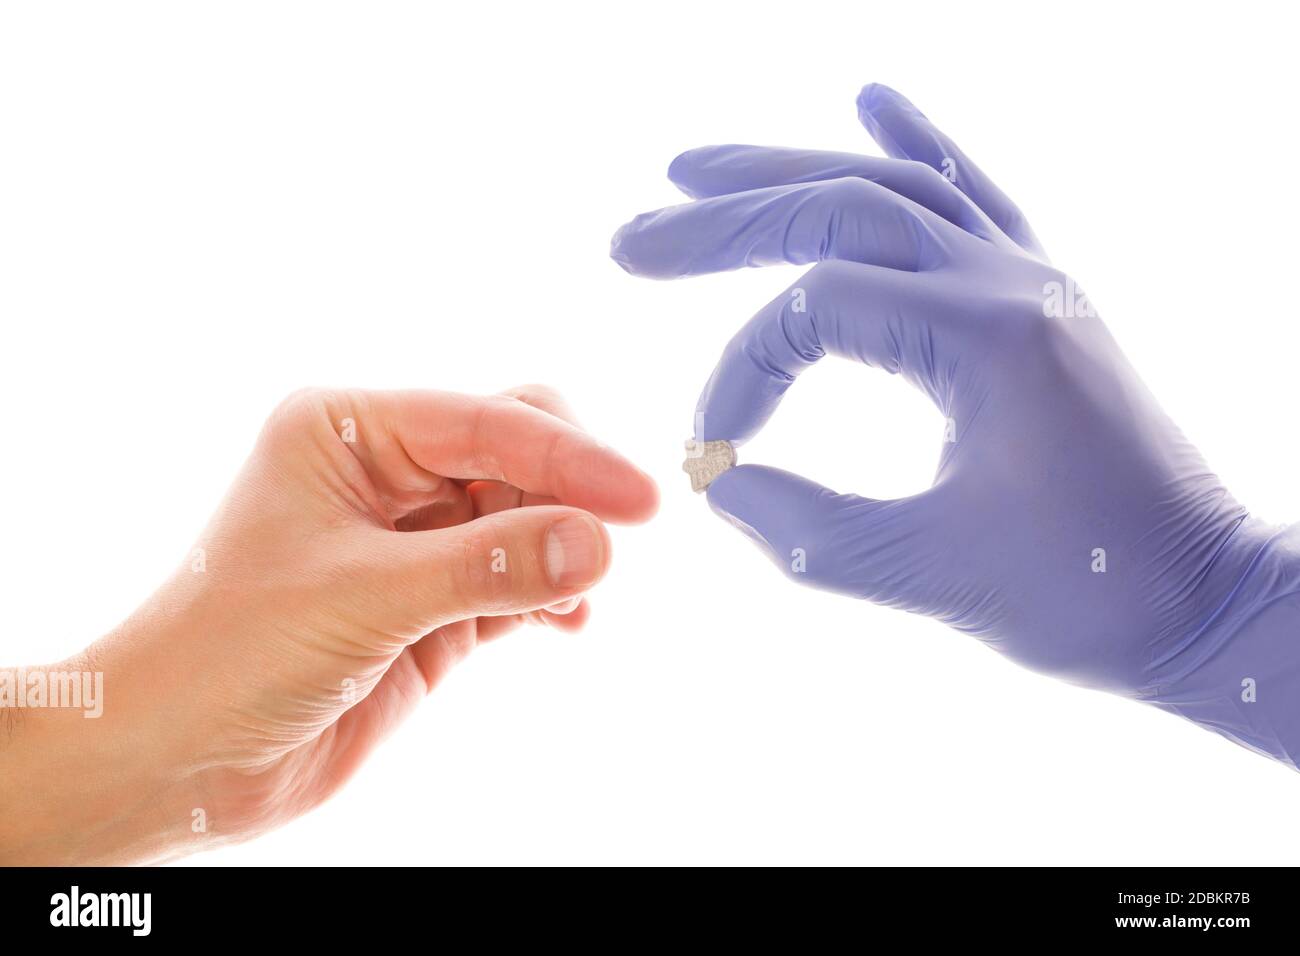 Doctor handing ecstacy pill to patiant. MDMA therapeutical use. Stock Photo